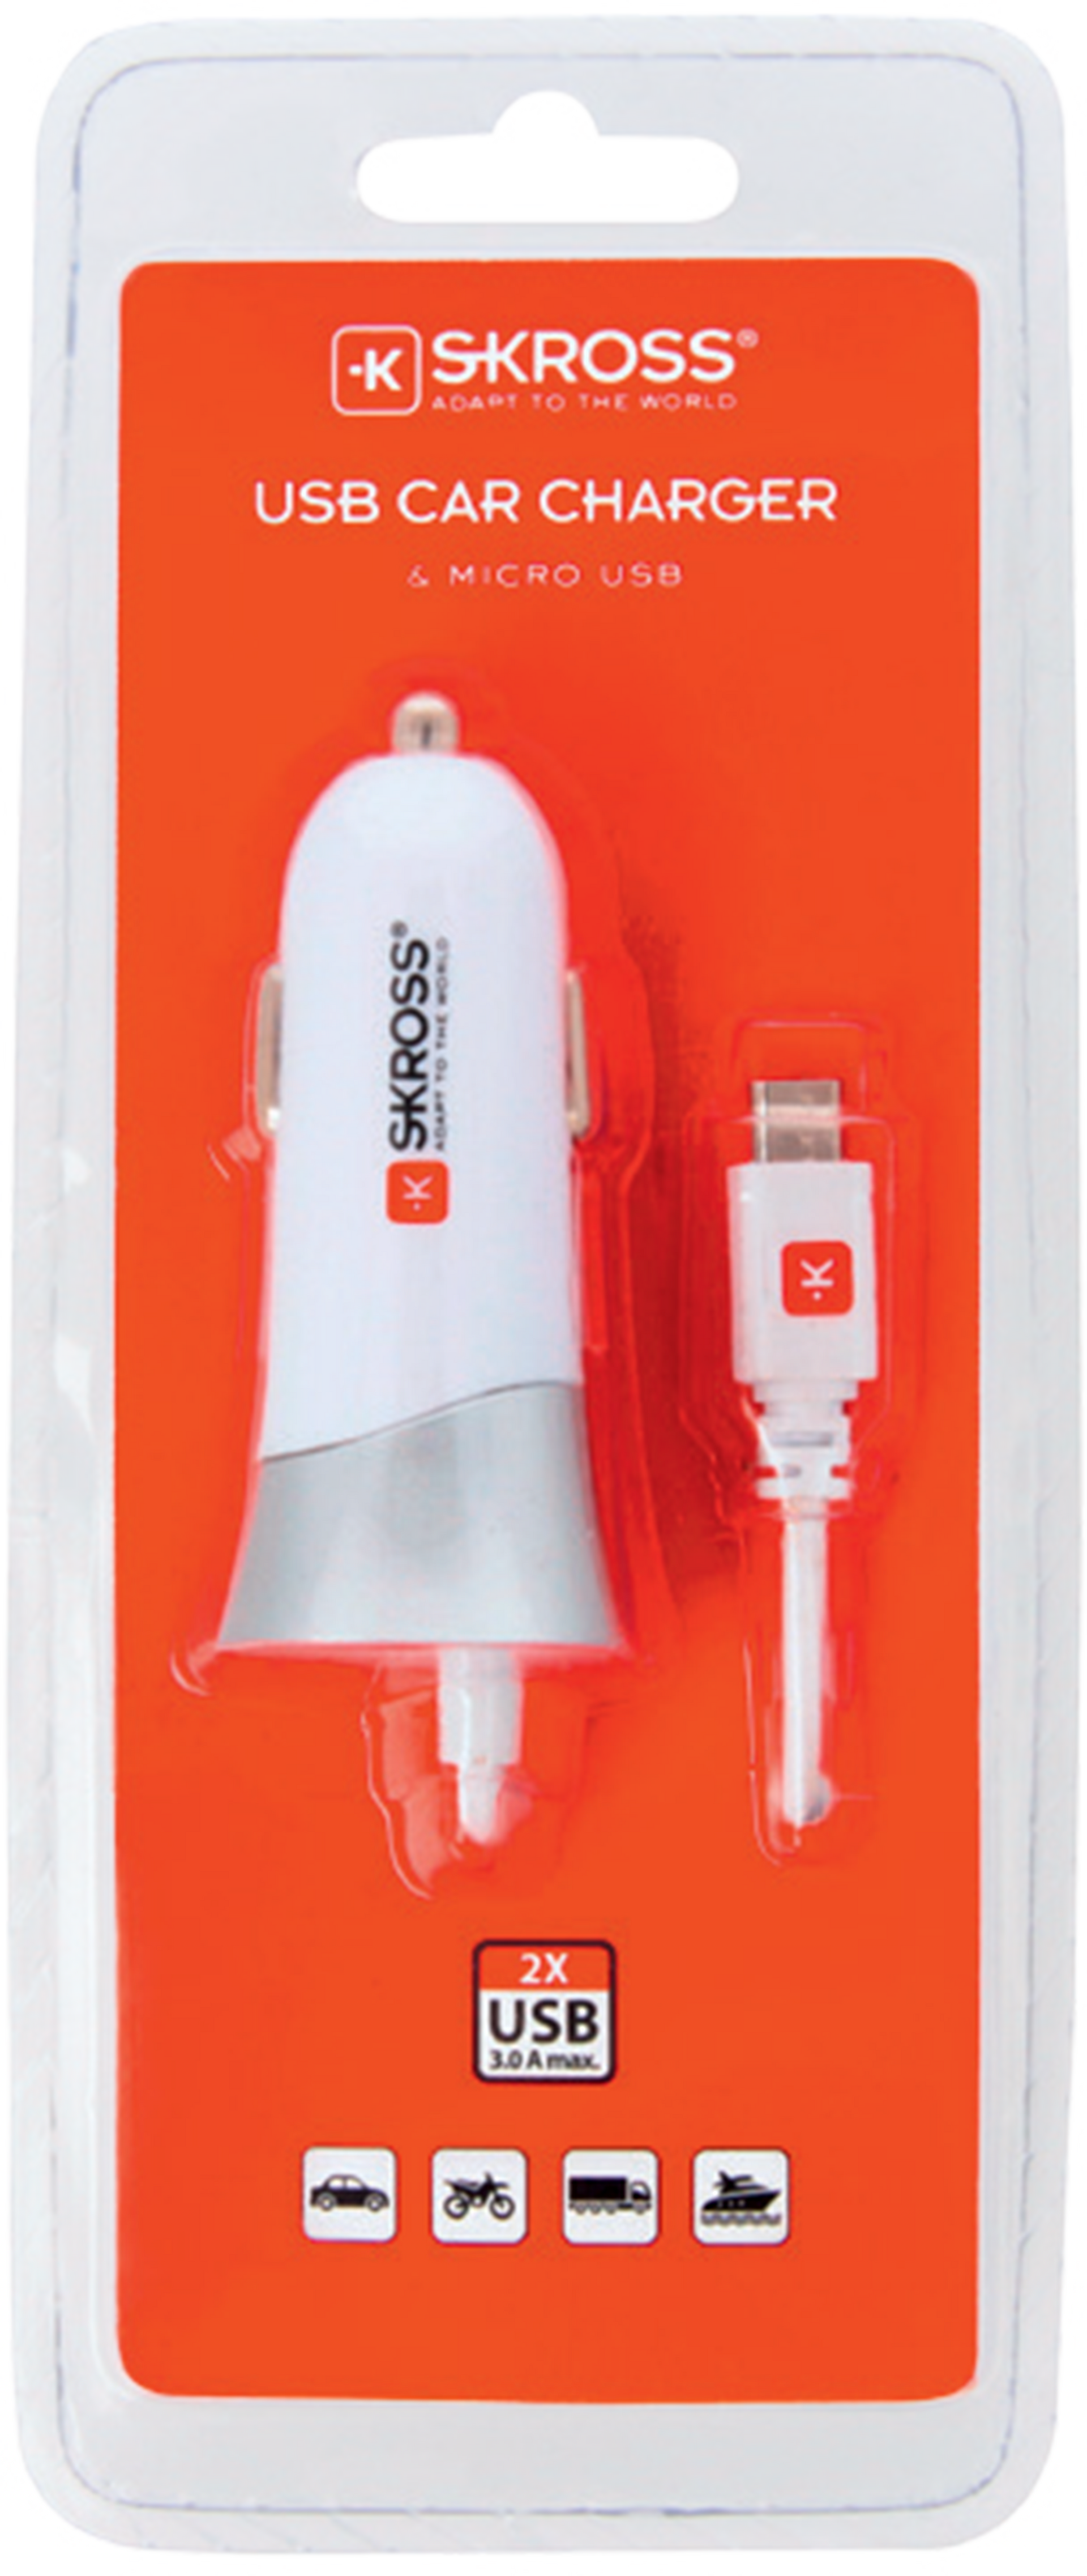 Skross Car USB Charger. USB Car Charger & Micro USB Packaging